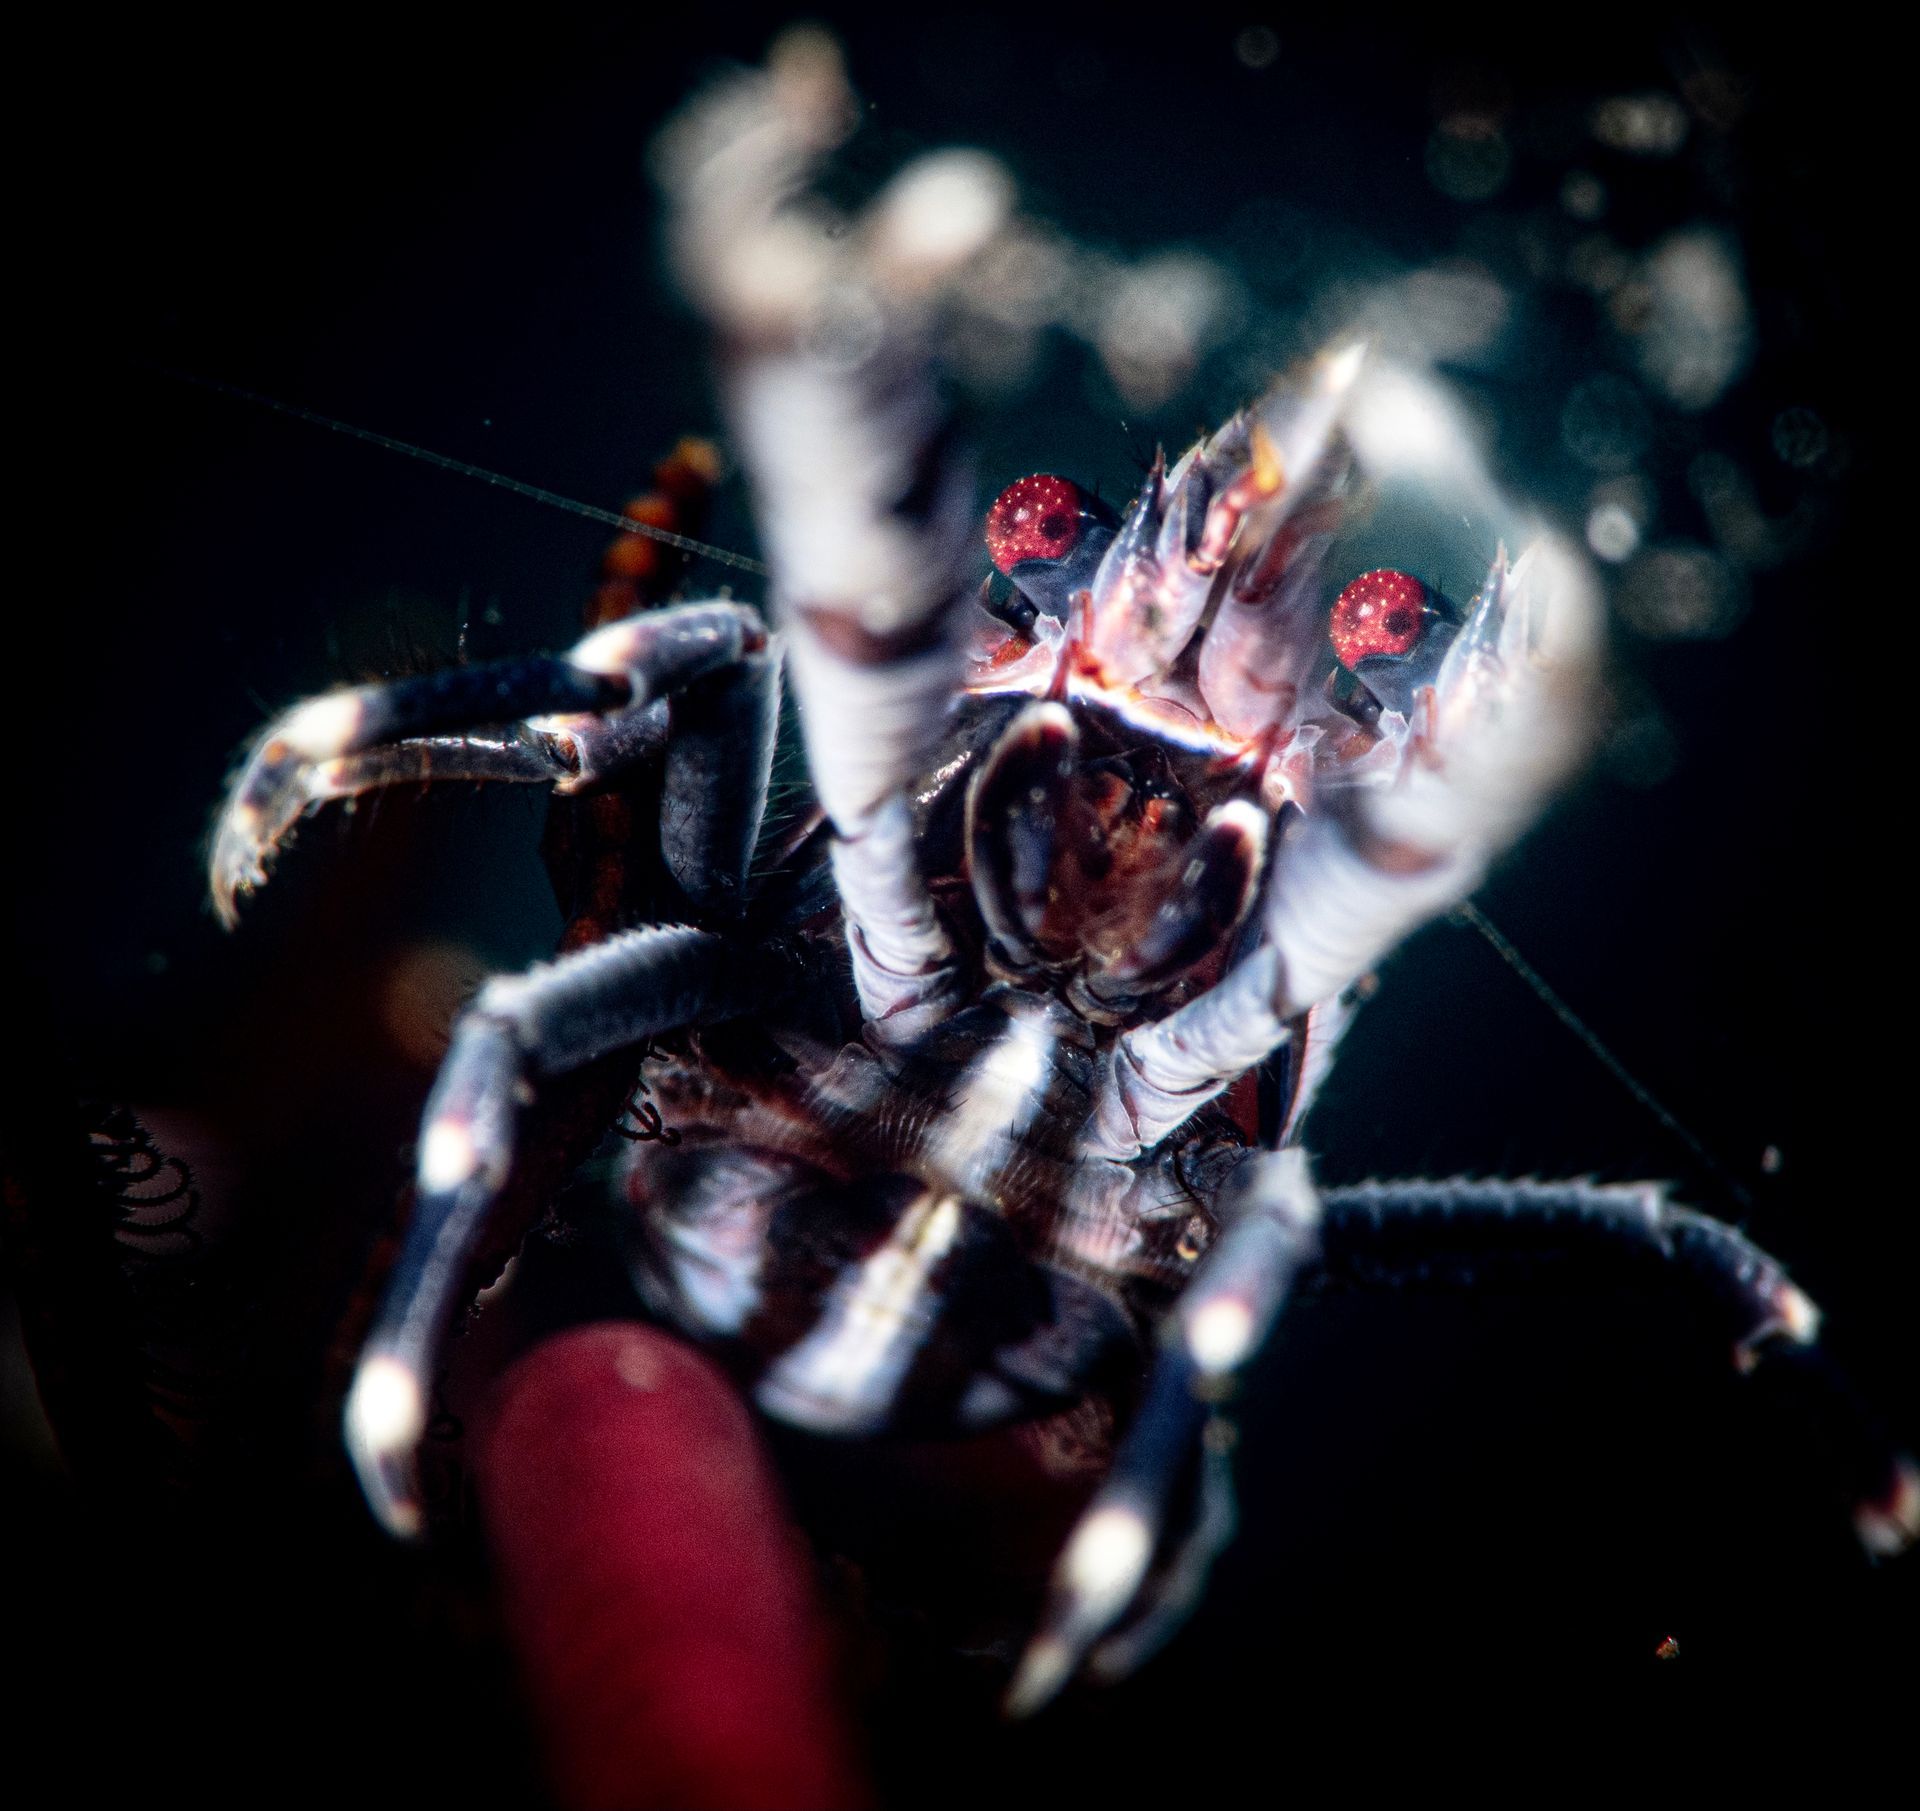 A crinoid squat lobster with bright red eyes and with its front claws defending itself  taken on a macro photography workshop in Fiji 